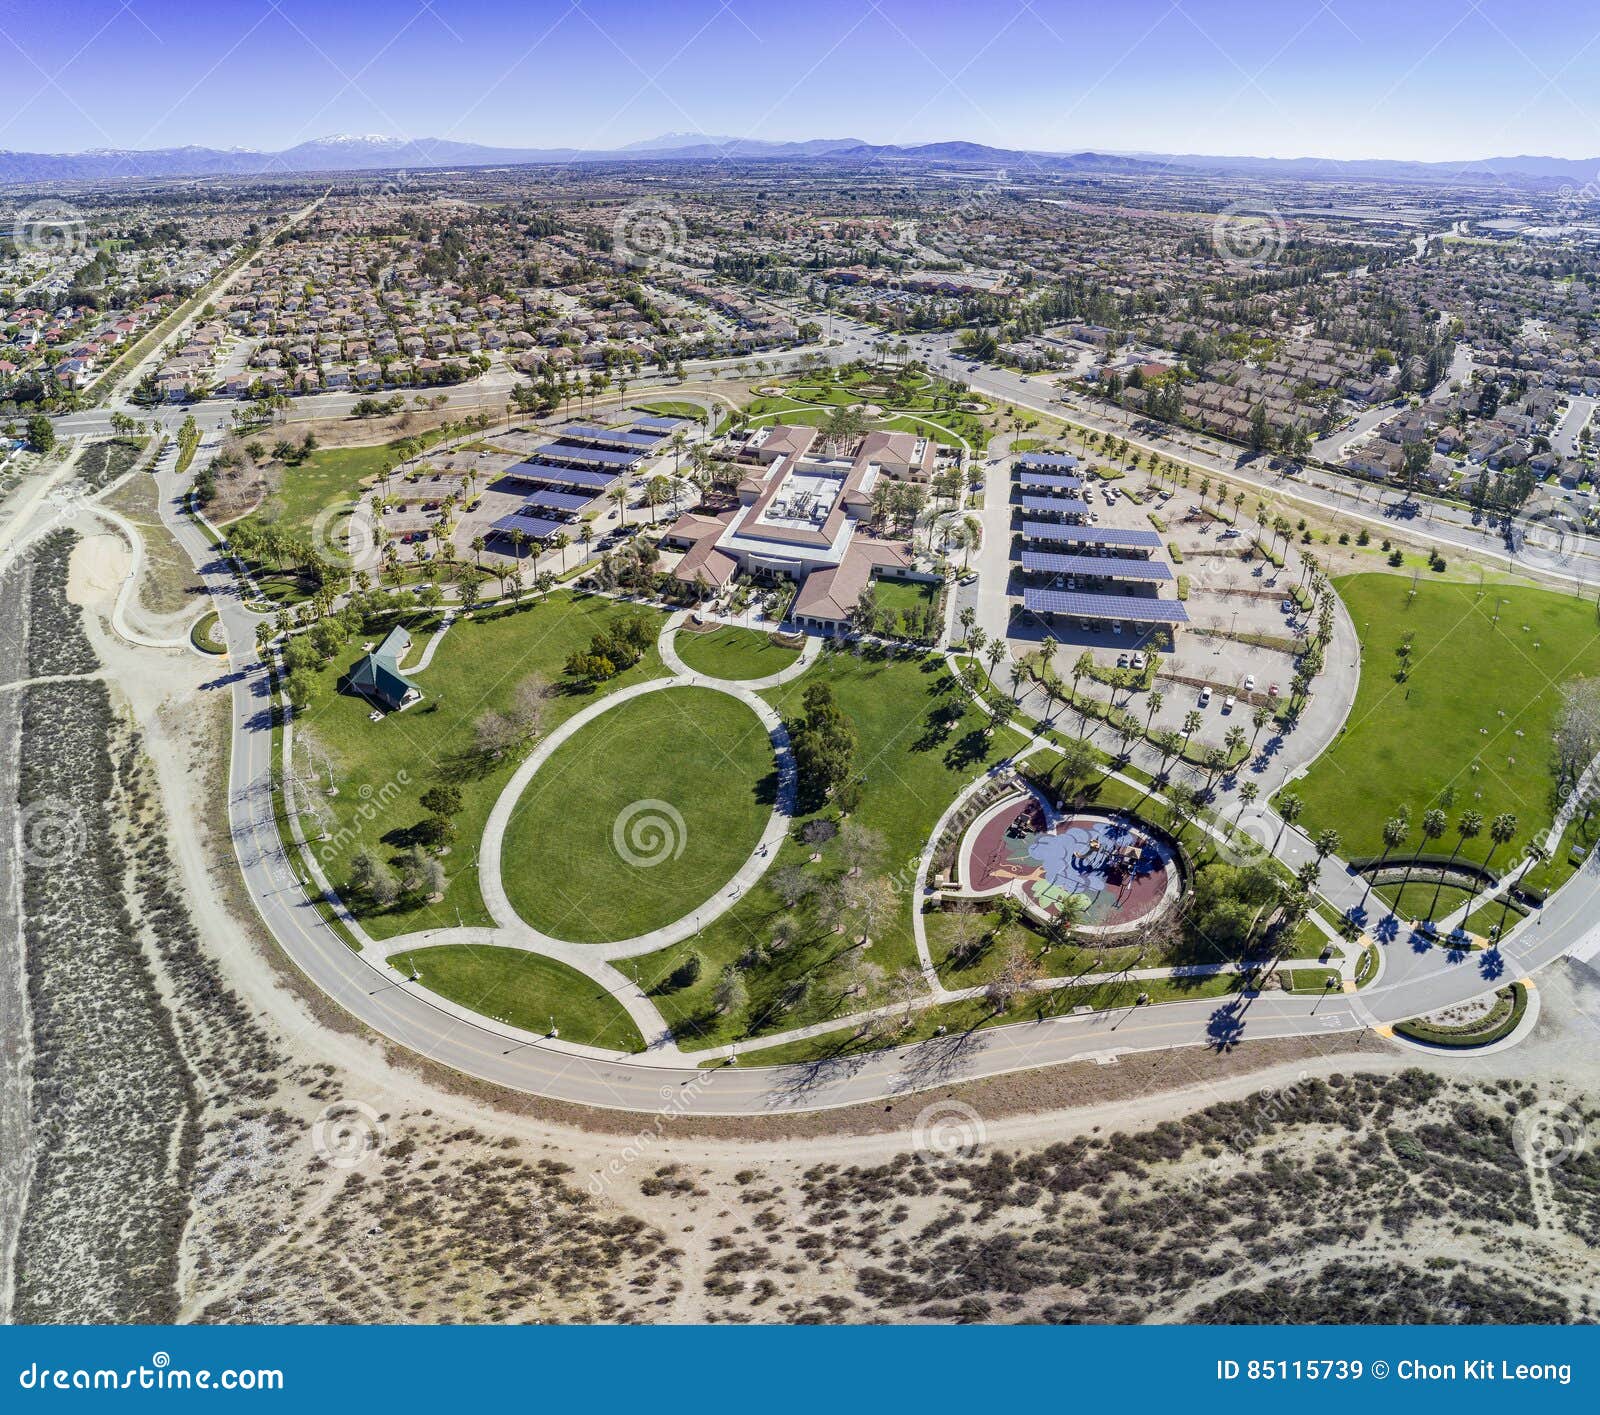 aerial view of the rancho cucamonga central park